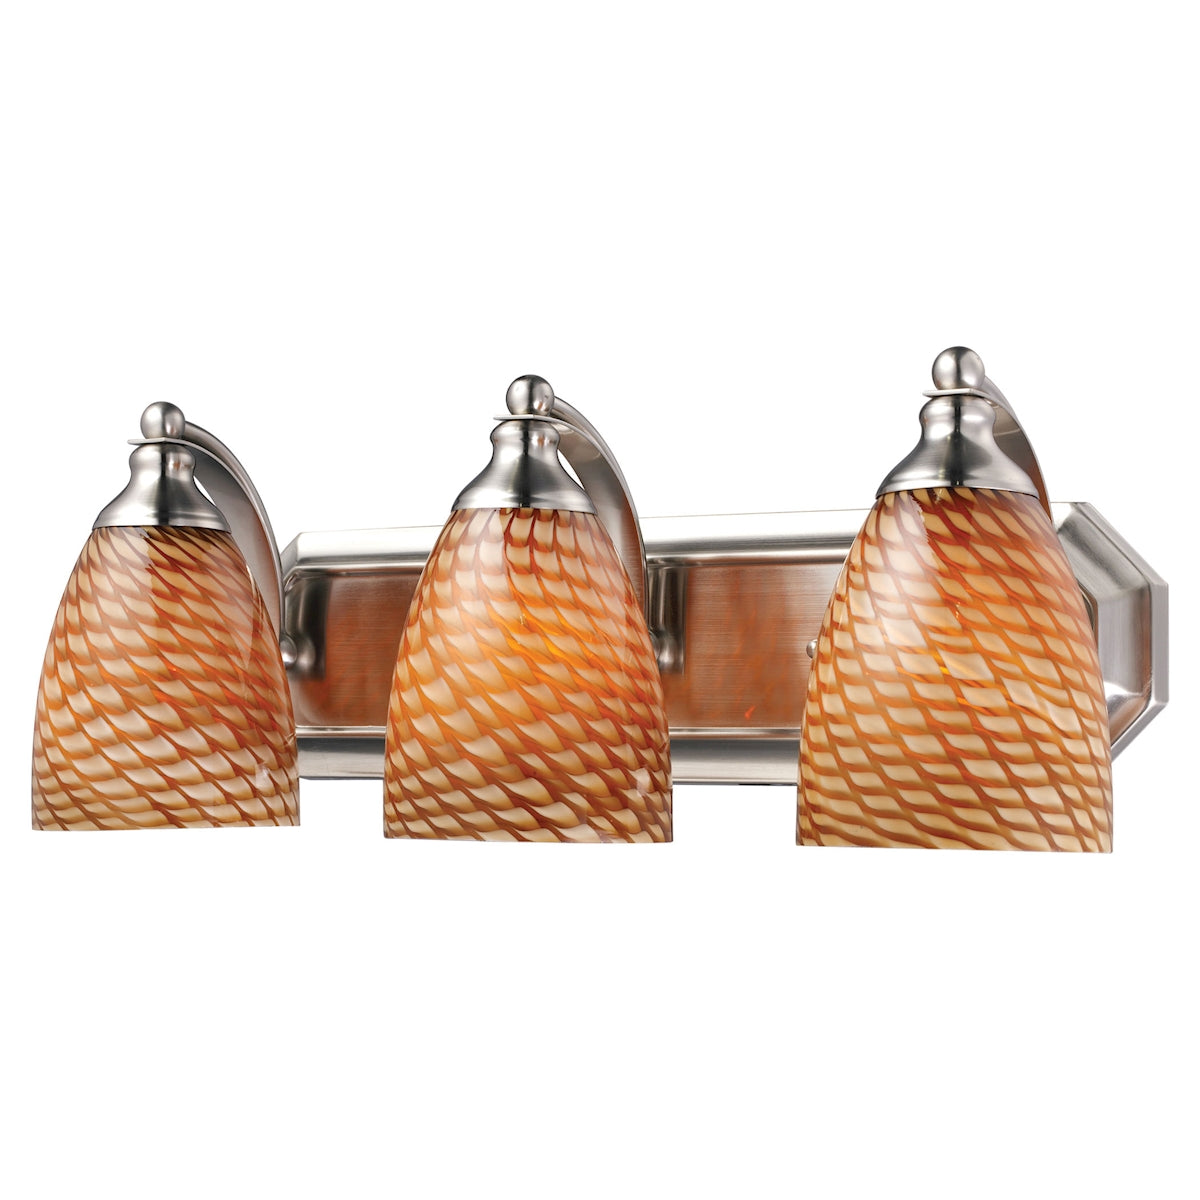 ELK Lighting 570-3N-C Mix-N-Match Vanity 3-Light Wall Lamp in Satin Nickel with Cocoa Glass